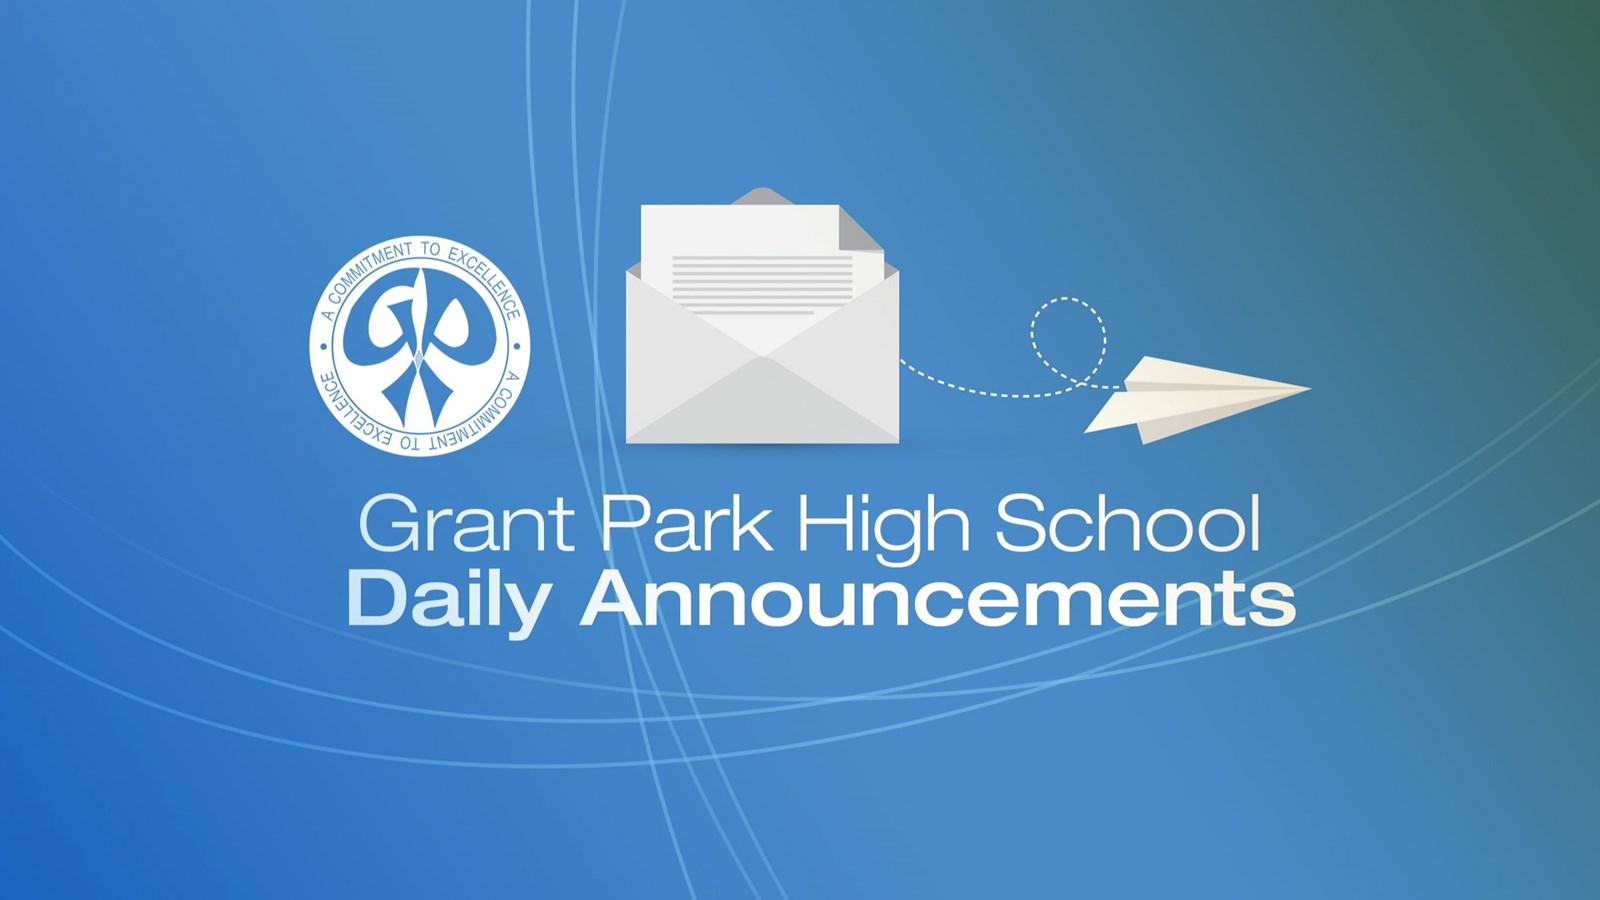 Daily Announcements